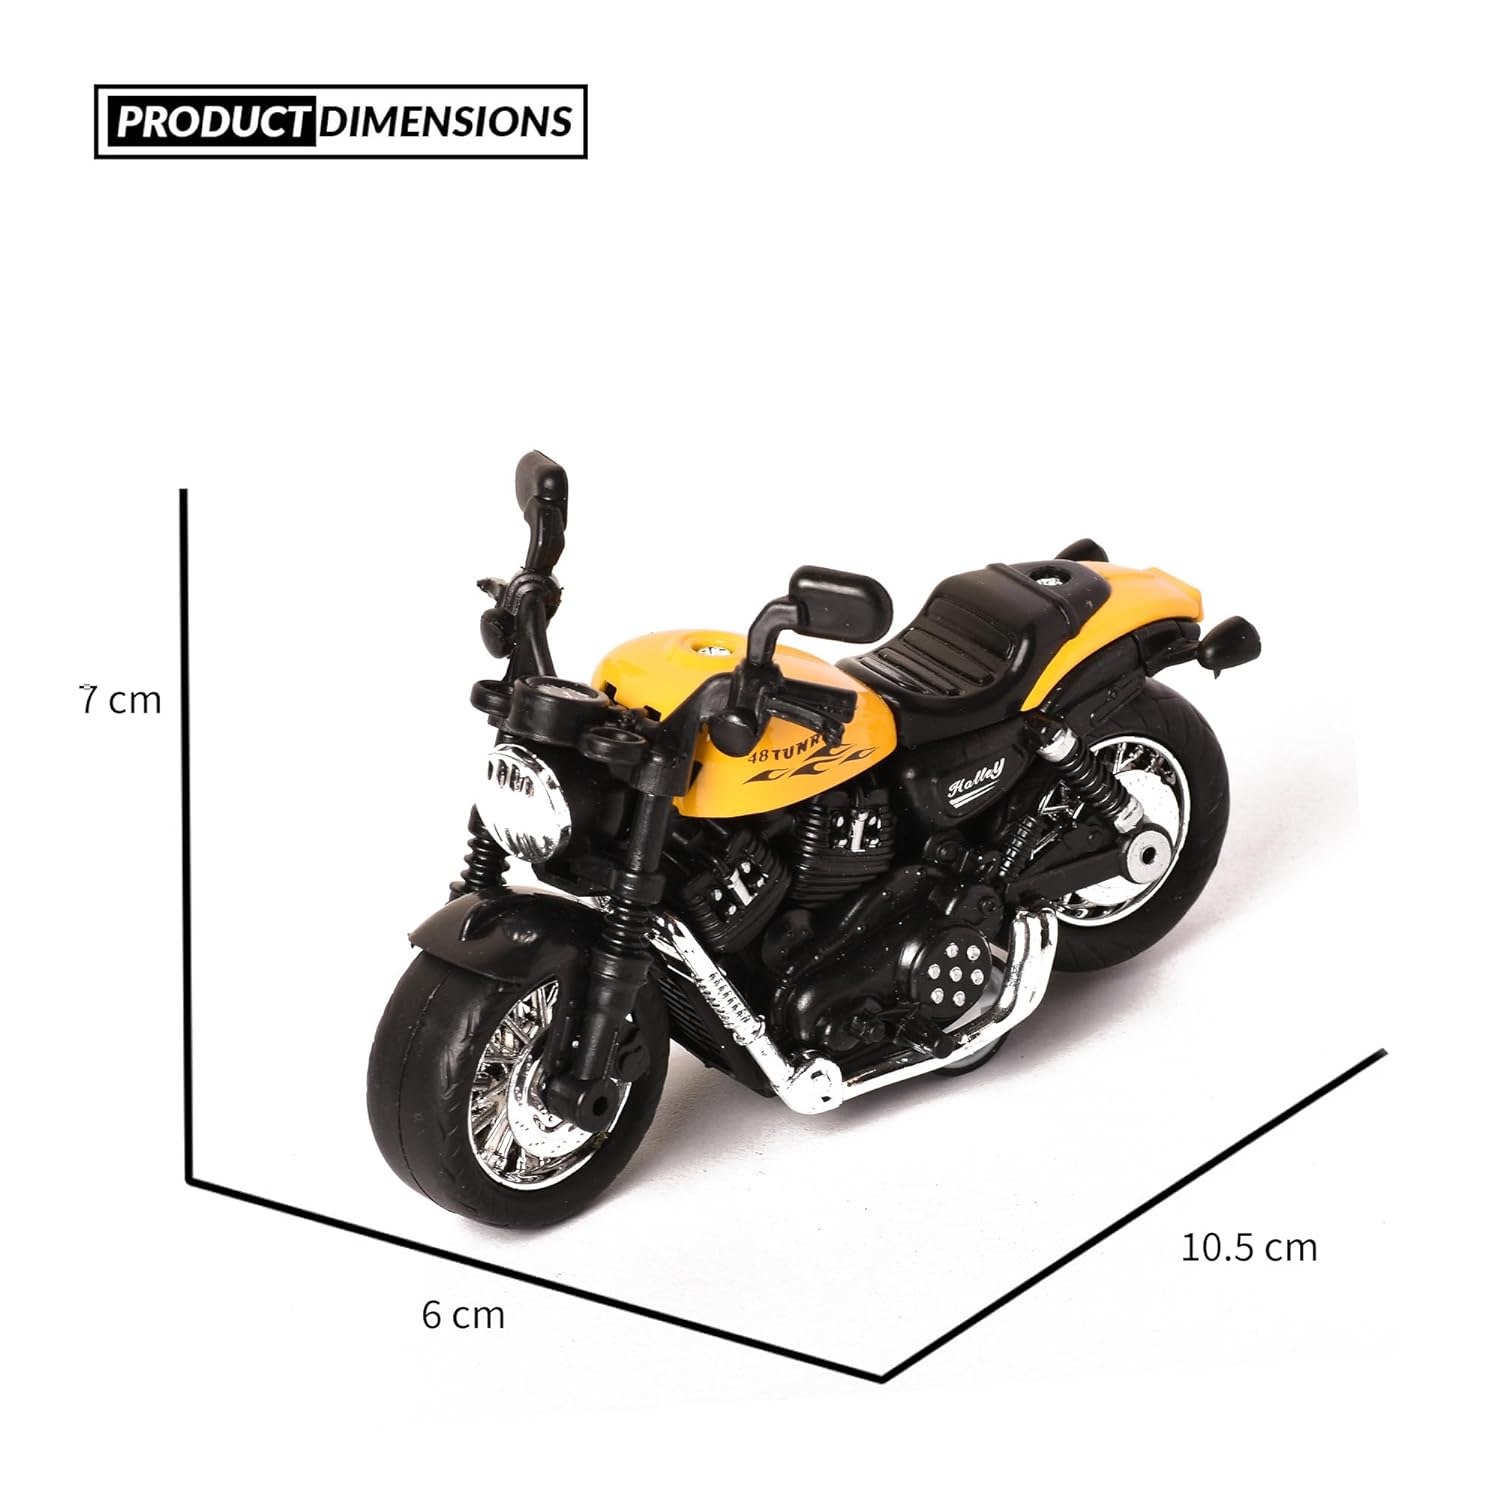 Braintastic Model Diecast Metal Bike Toy Vehicle Pull Back Friction Car Toys for Kids Age 3+ Years (Royal Enfield Yellow)